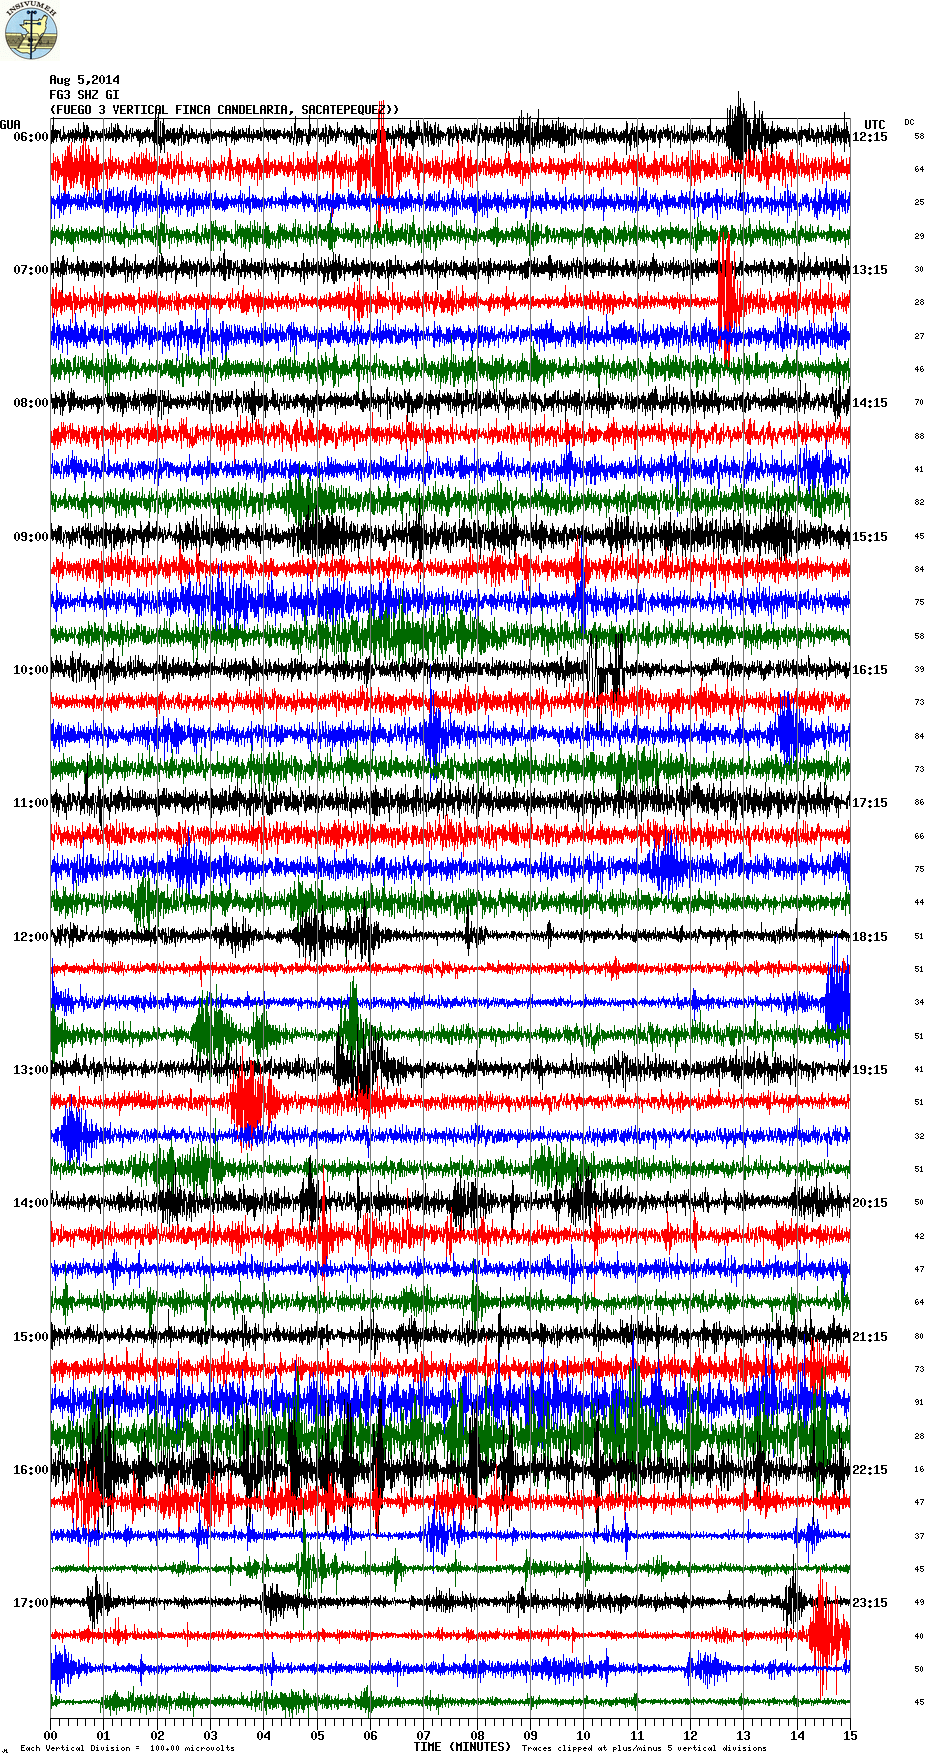 Increased seismic activity at Fuego yesterday (FG3 station, INSIVUMEH)